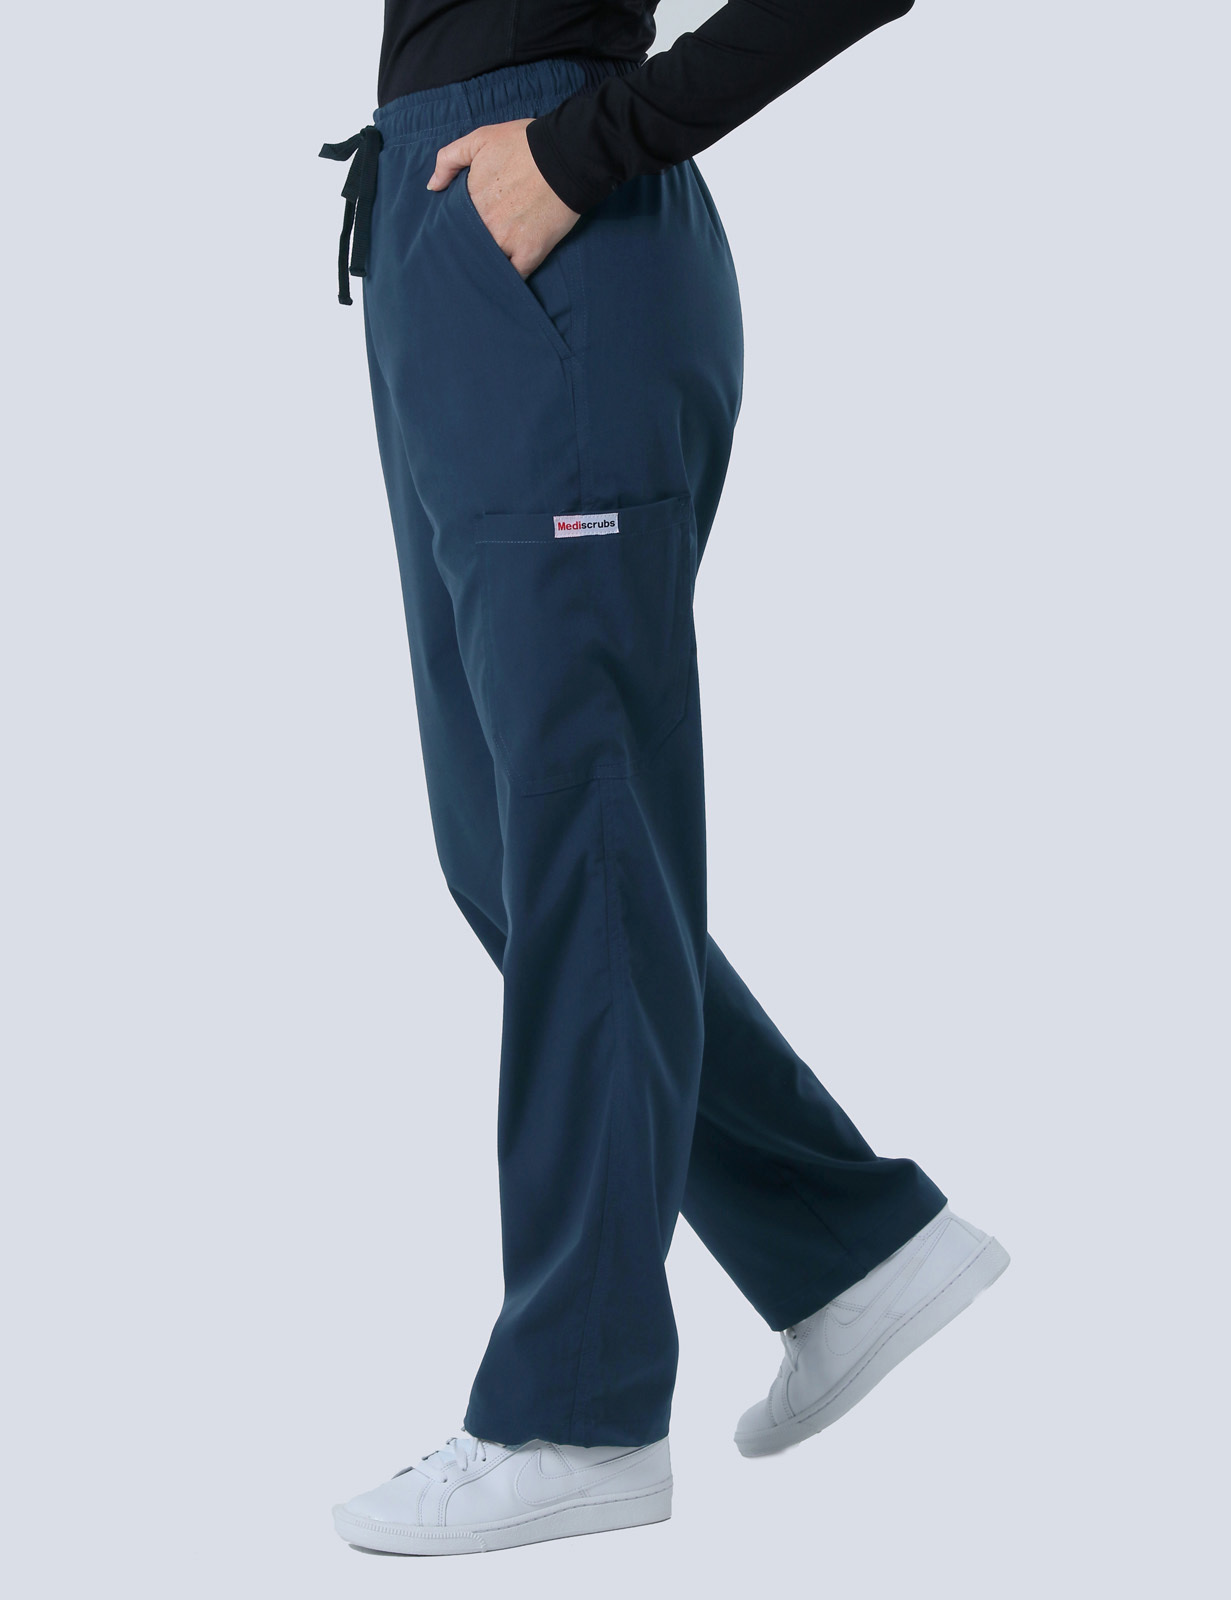 Hobart Hospital - ED RN (Women's Fit Solid Spandex Scrub Top and Cargo Pants in Navy incl Logos)